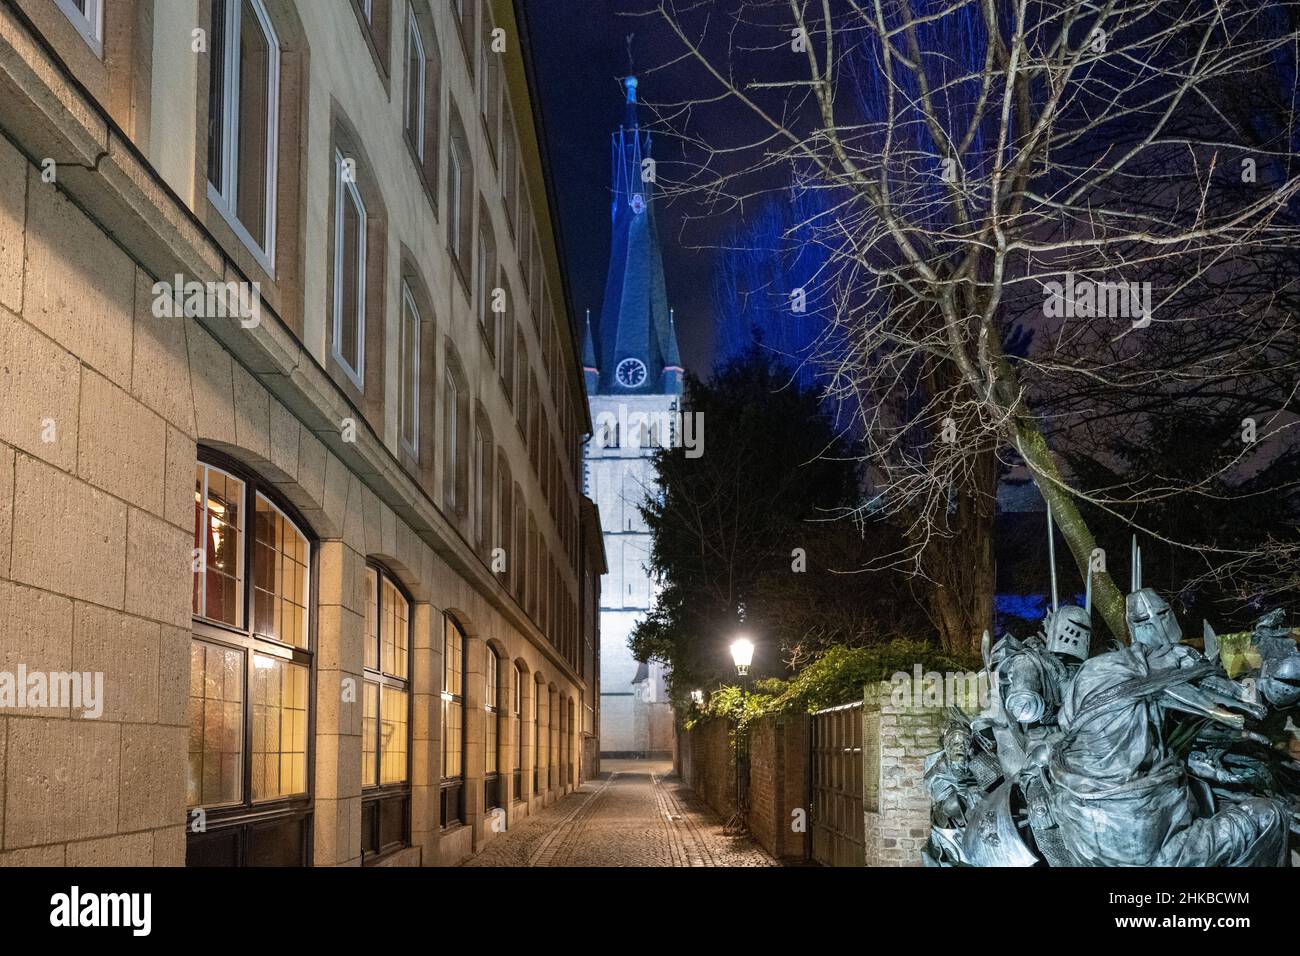 Müller-Schlösser-Gasse, city elevation monument and St.Lambertus church at night in the old town of Düsseldorf, NRW, Germany on 11.12.2021 Stock Photo